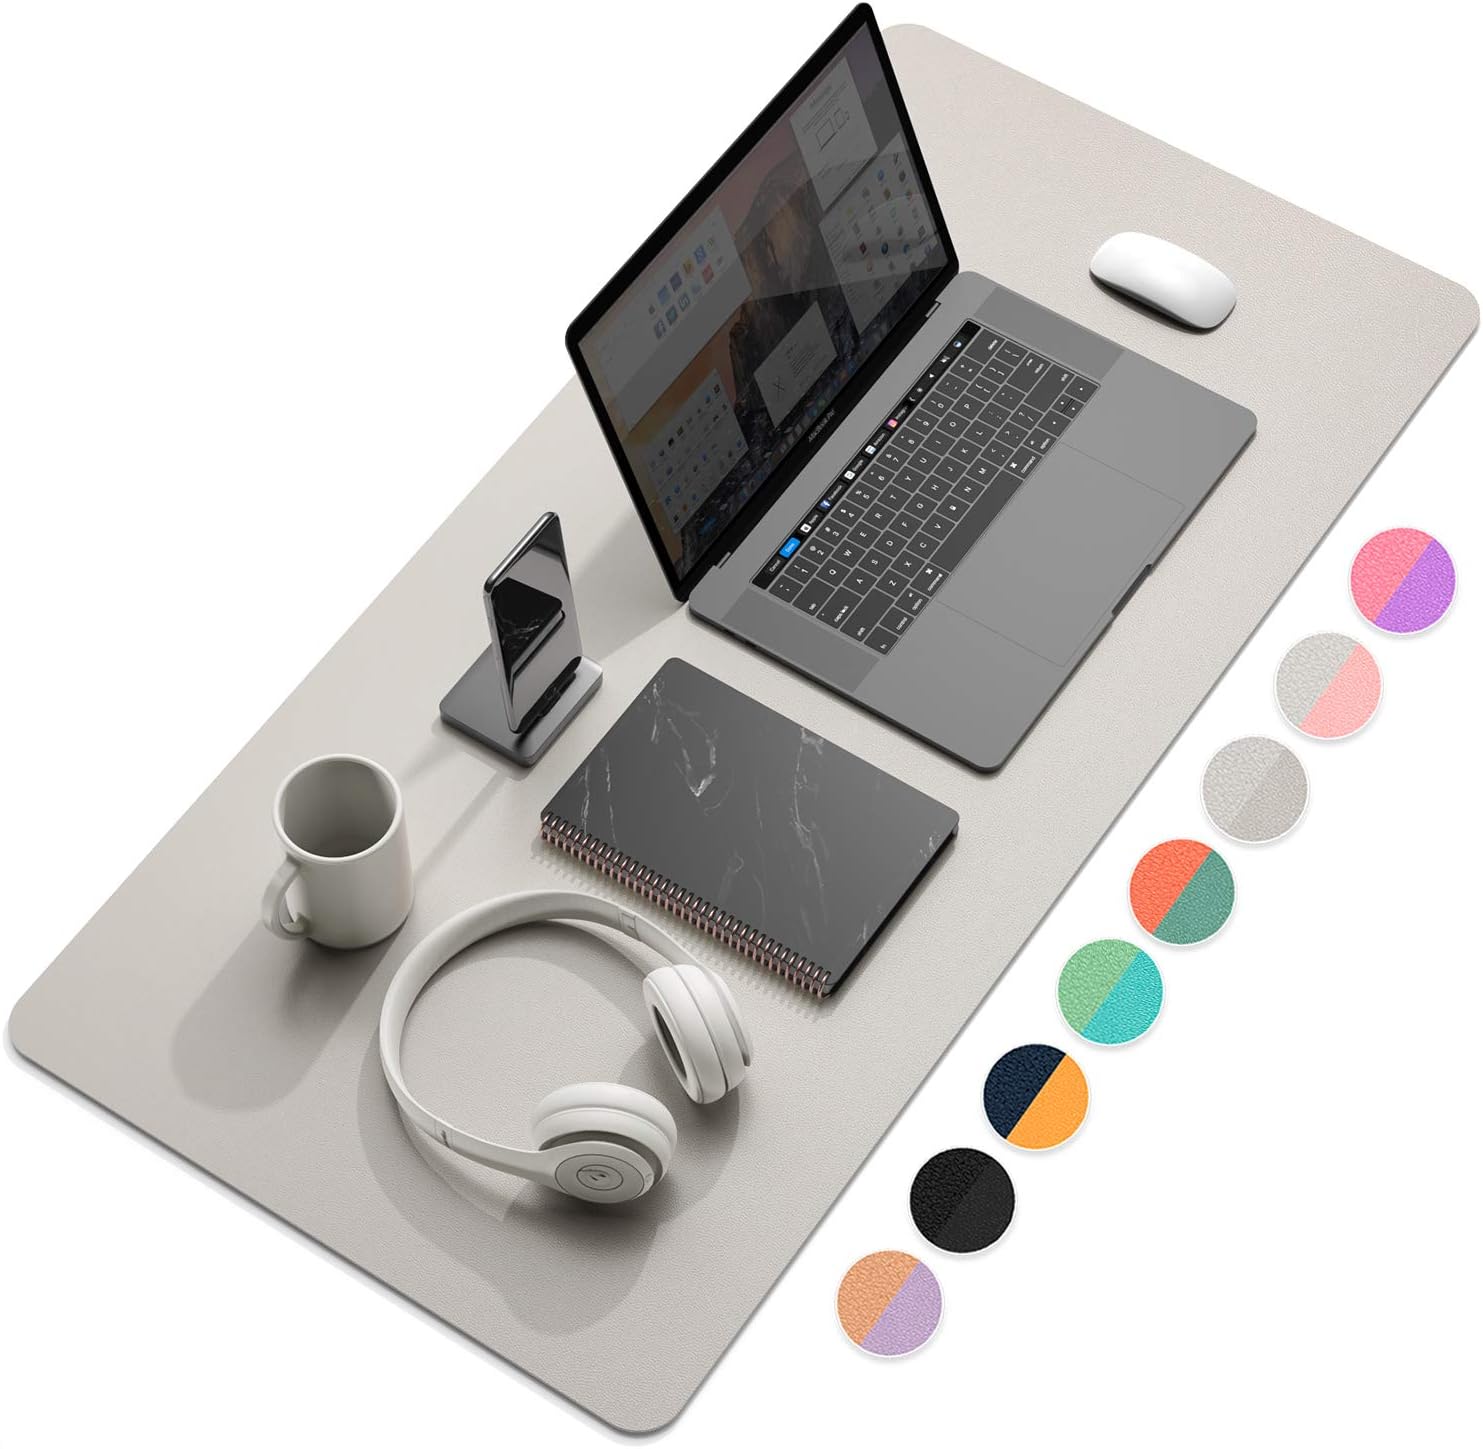 YSAGi Desk Mat, Mouse Pad,Waterproof Desk Pad,Large Mouse pad for Desk, Leather Desk Pad Large for Keyboard and Mouse,Dual-Sided Mouse Mat for Office and Home (35.4" x 17", Grey)